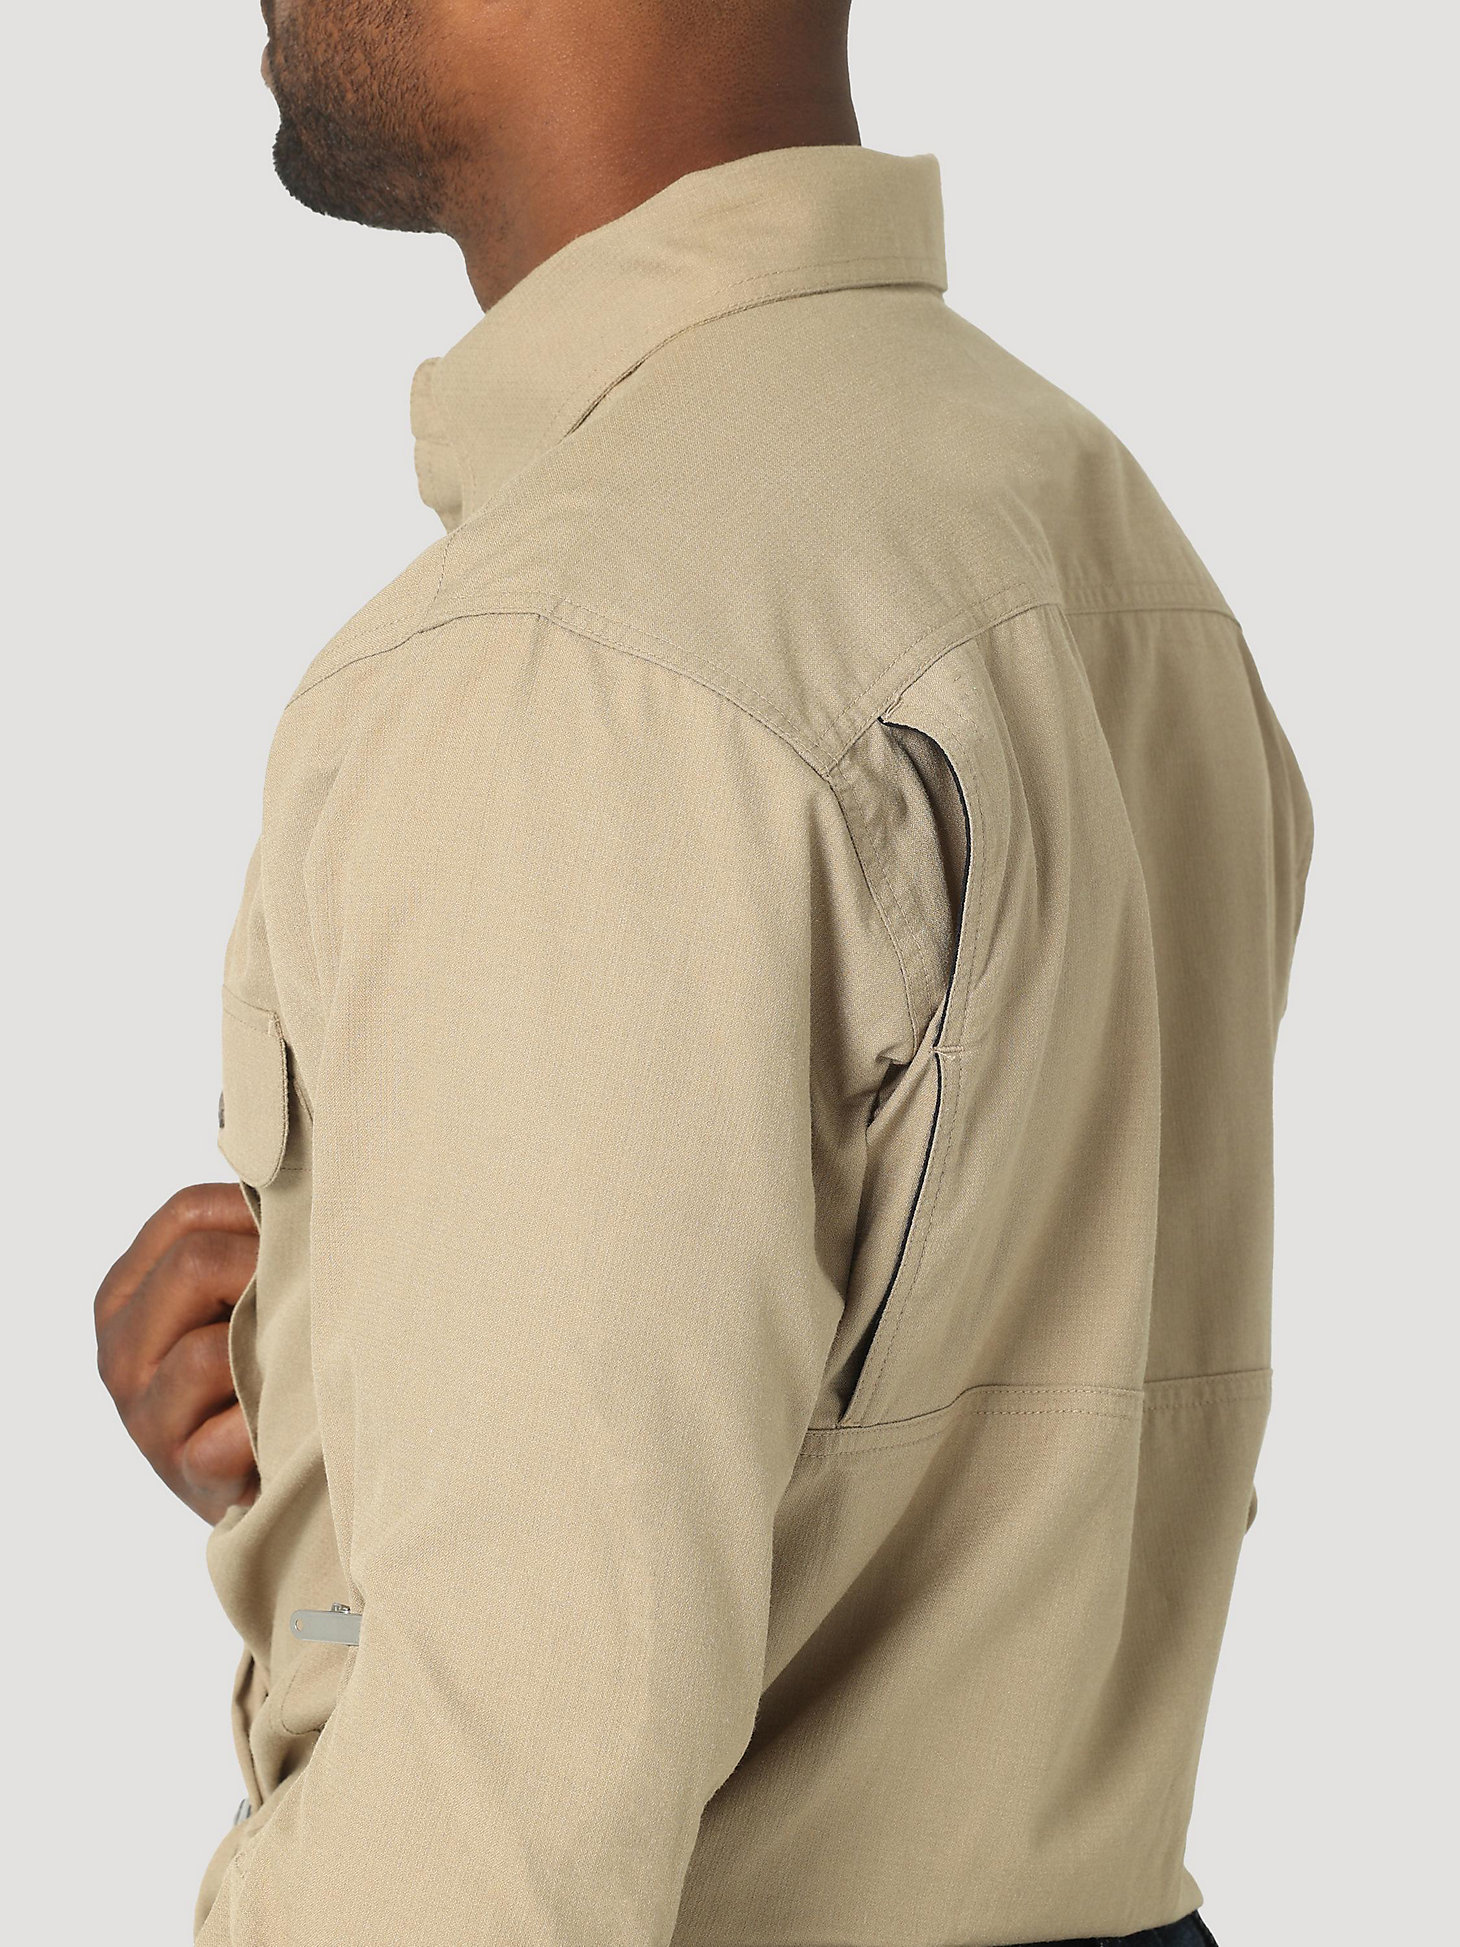 FR Flame Resistant 20X Long Sleeve Vented Work Shirt in Khaki alternative view 4